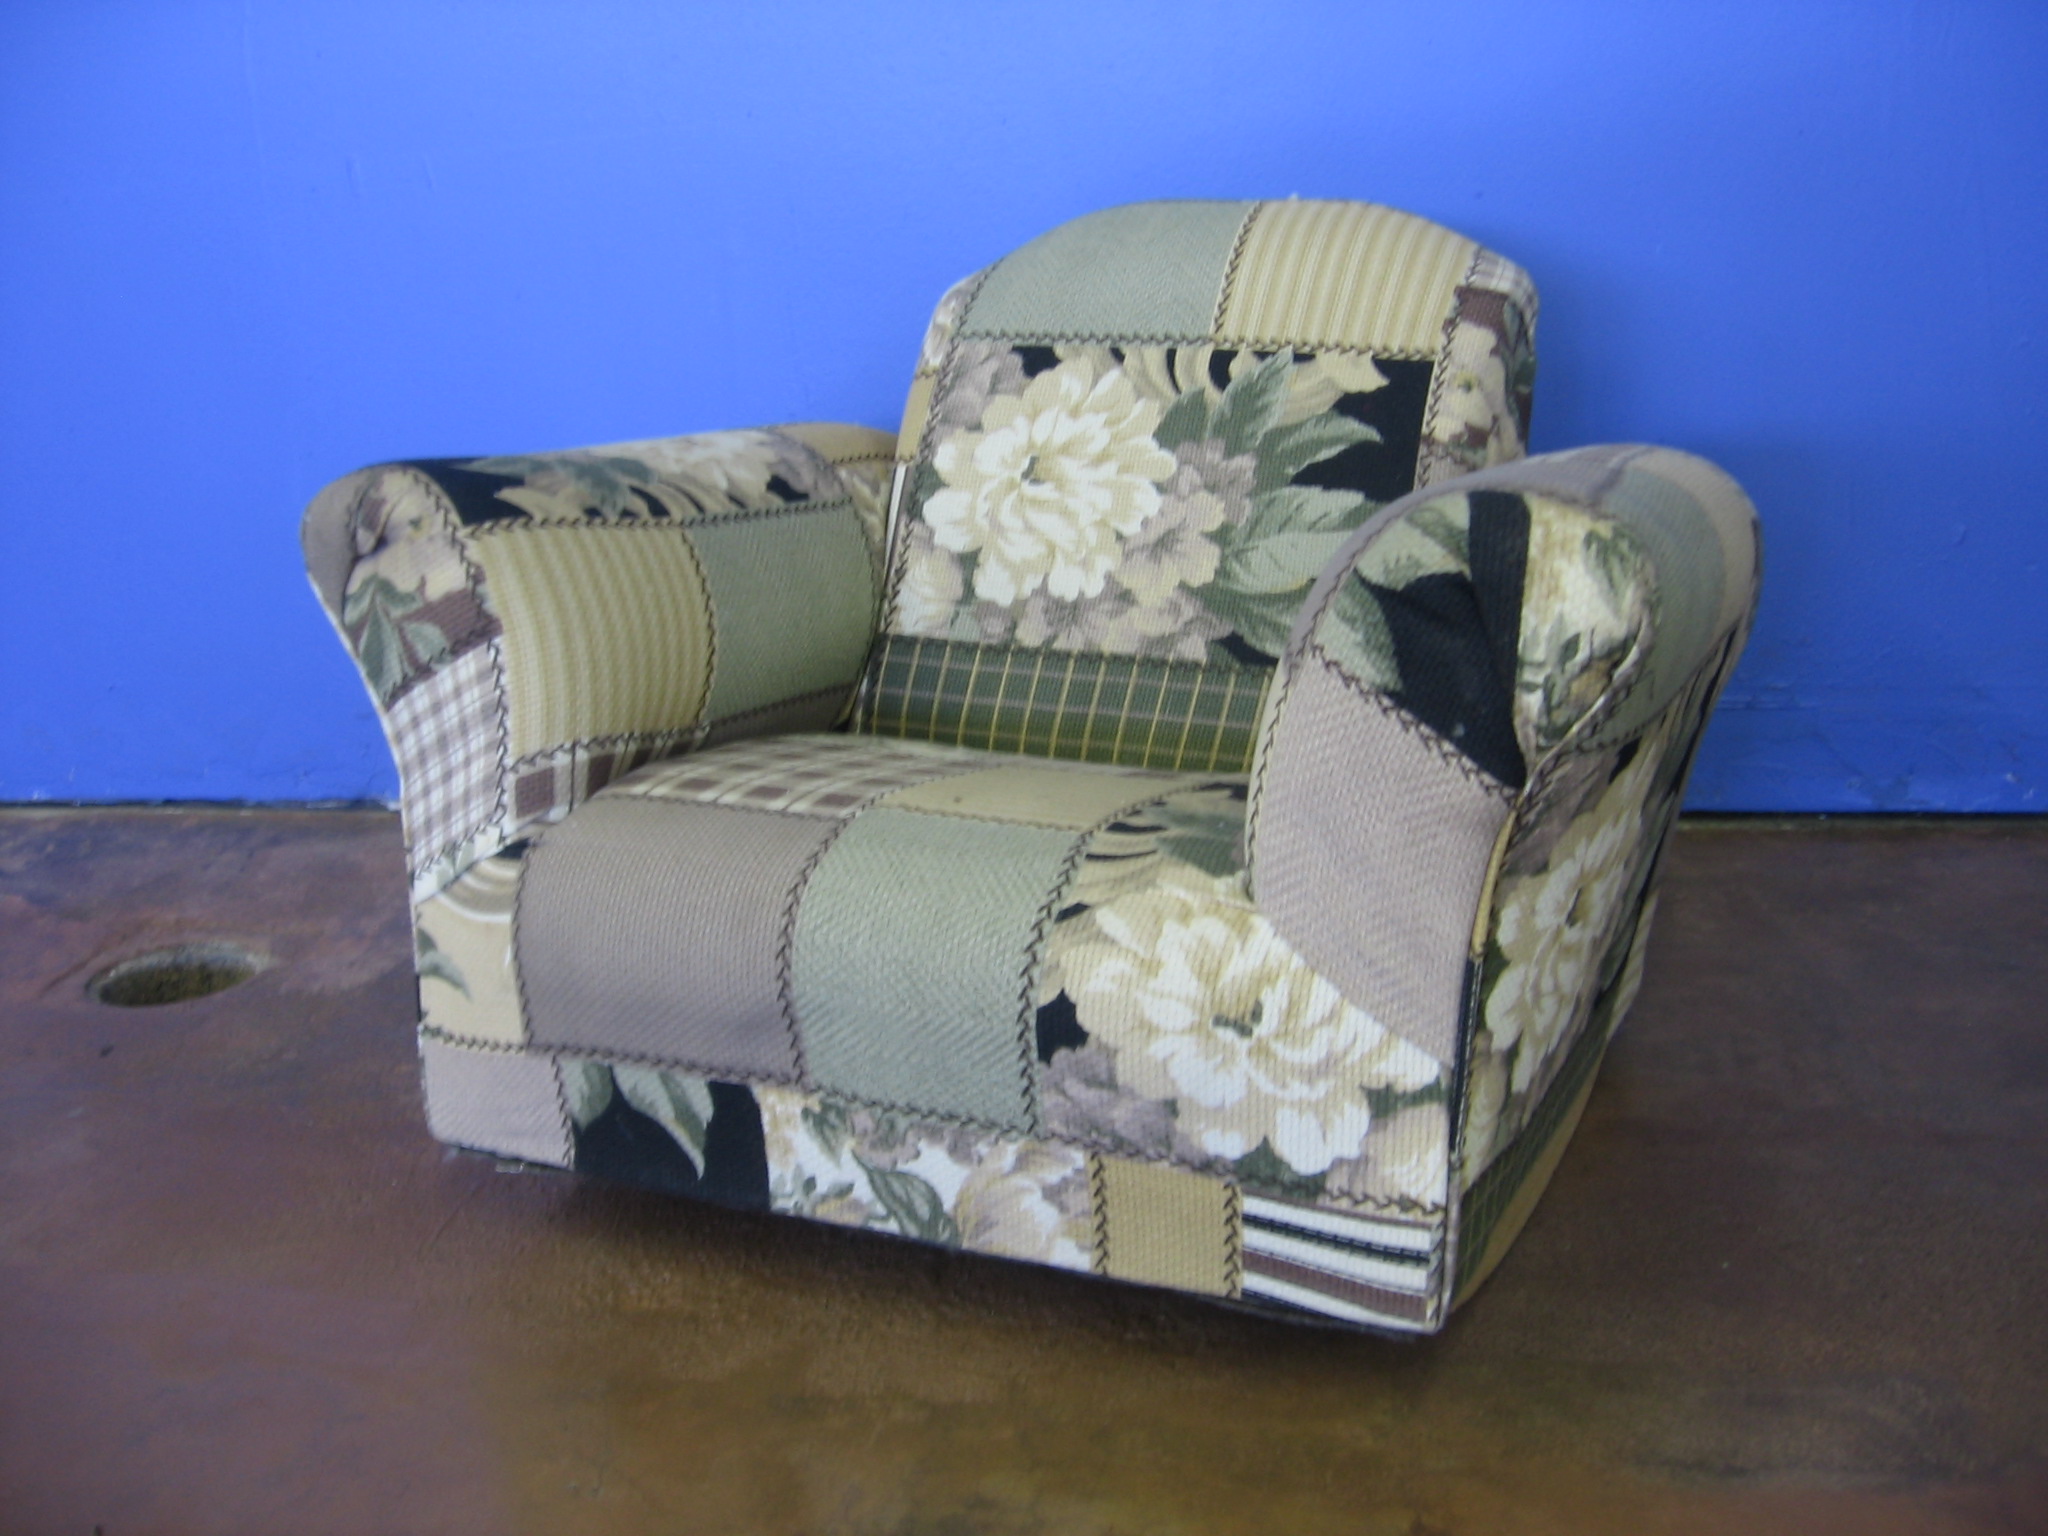 this chair is covered with floral fabric